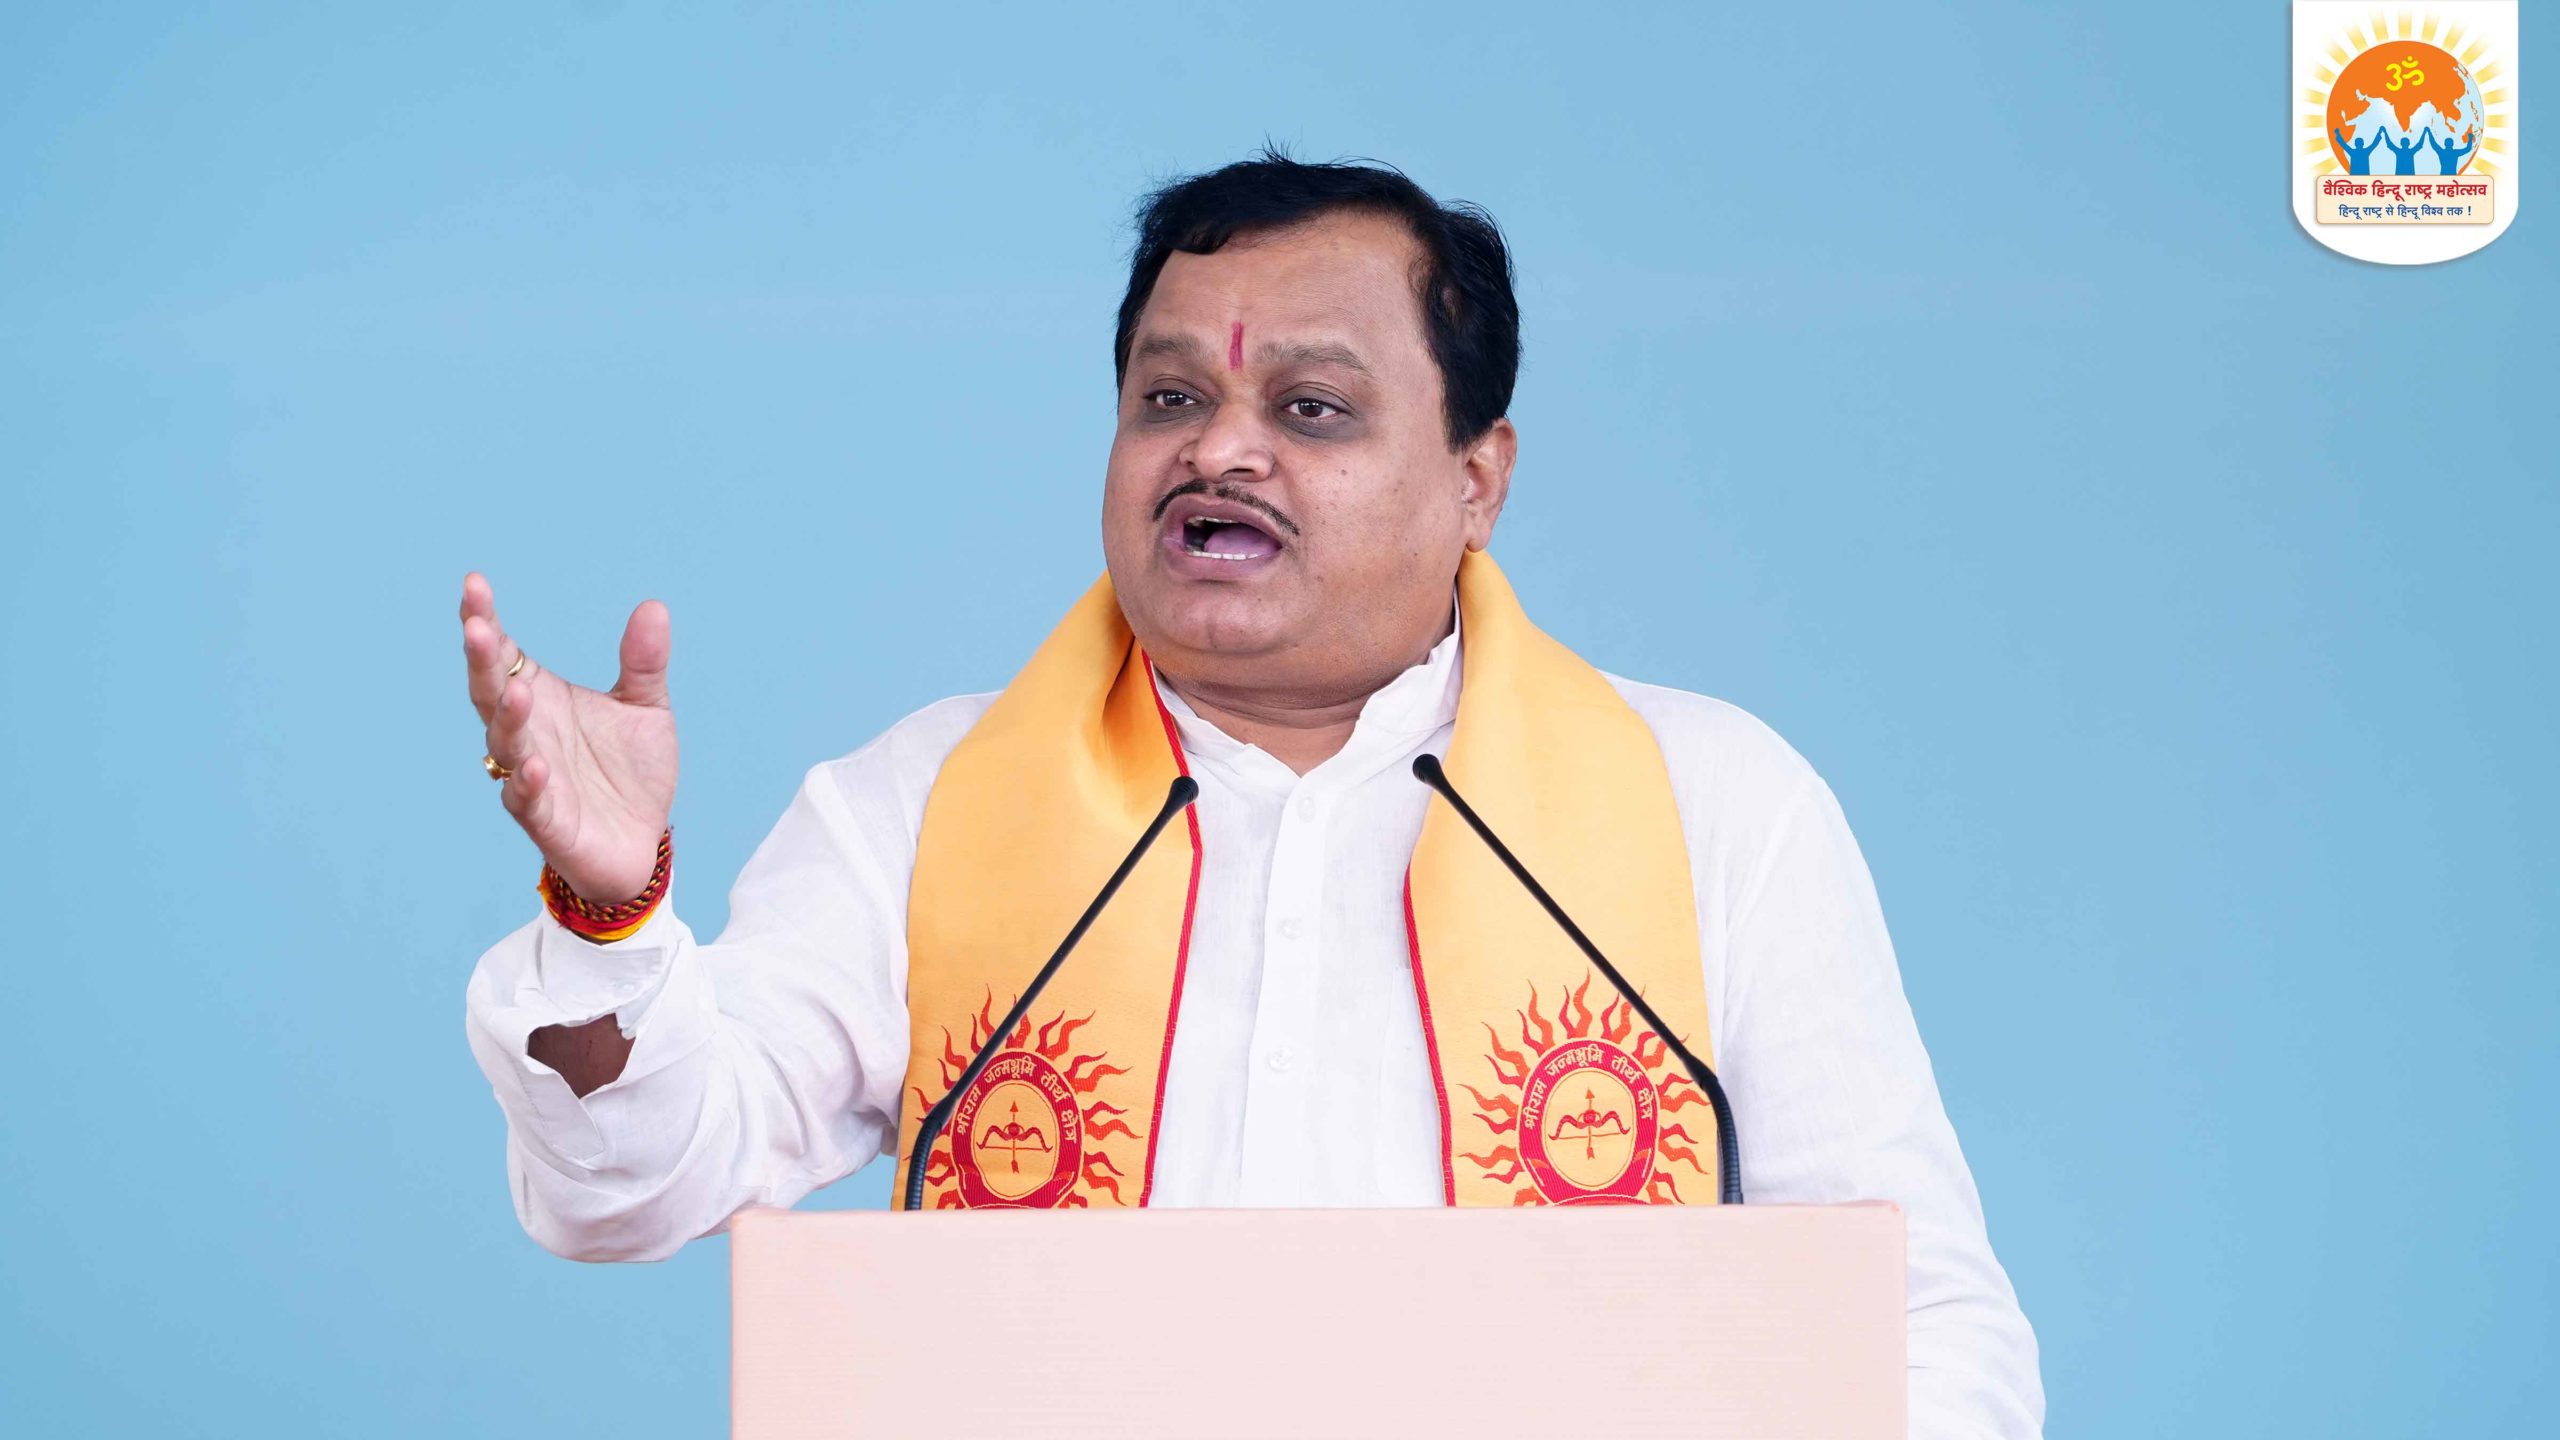 Mr Suresh Chavhanke (CMD & Editor-in-Chief, Sudarshan News TV), while addressing a session in Vaishvik Hindu Rashtra Mahotsav, said, "The Union Government has to enact a law for Population Control'